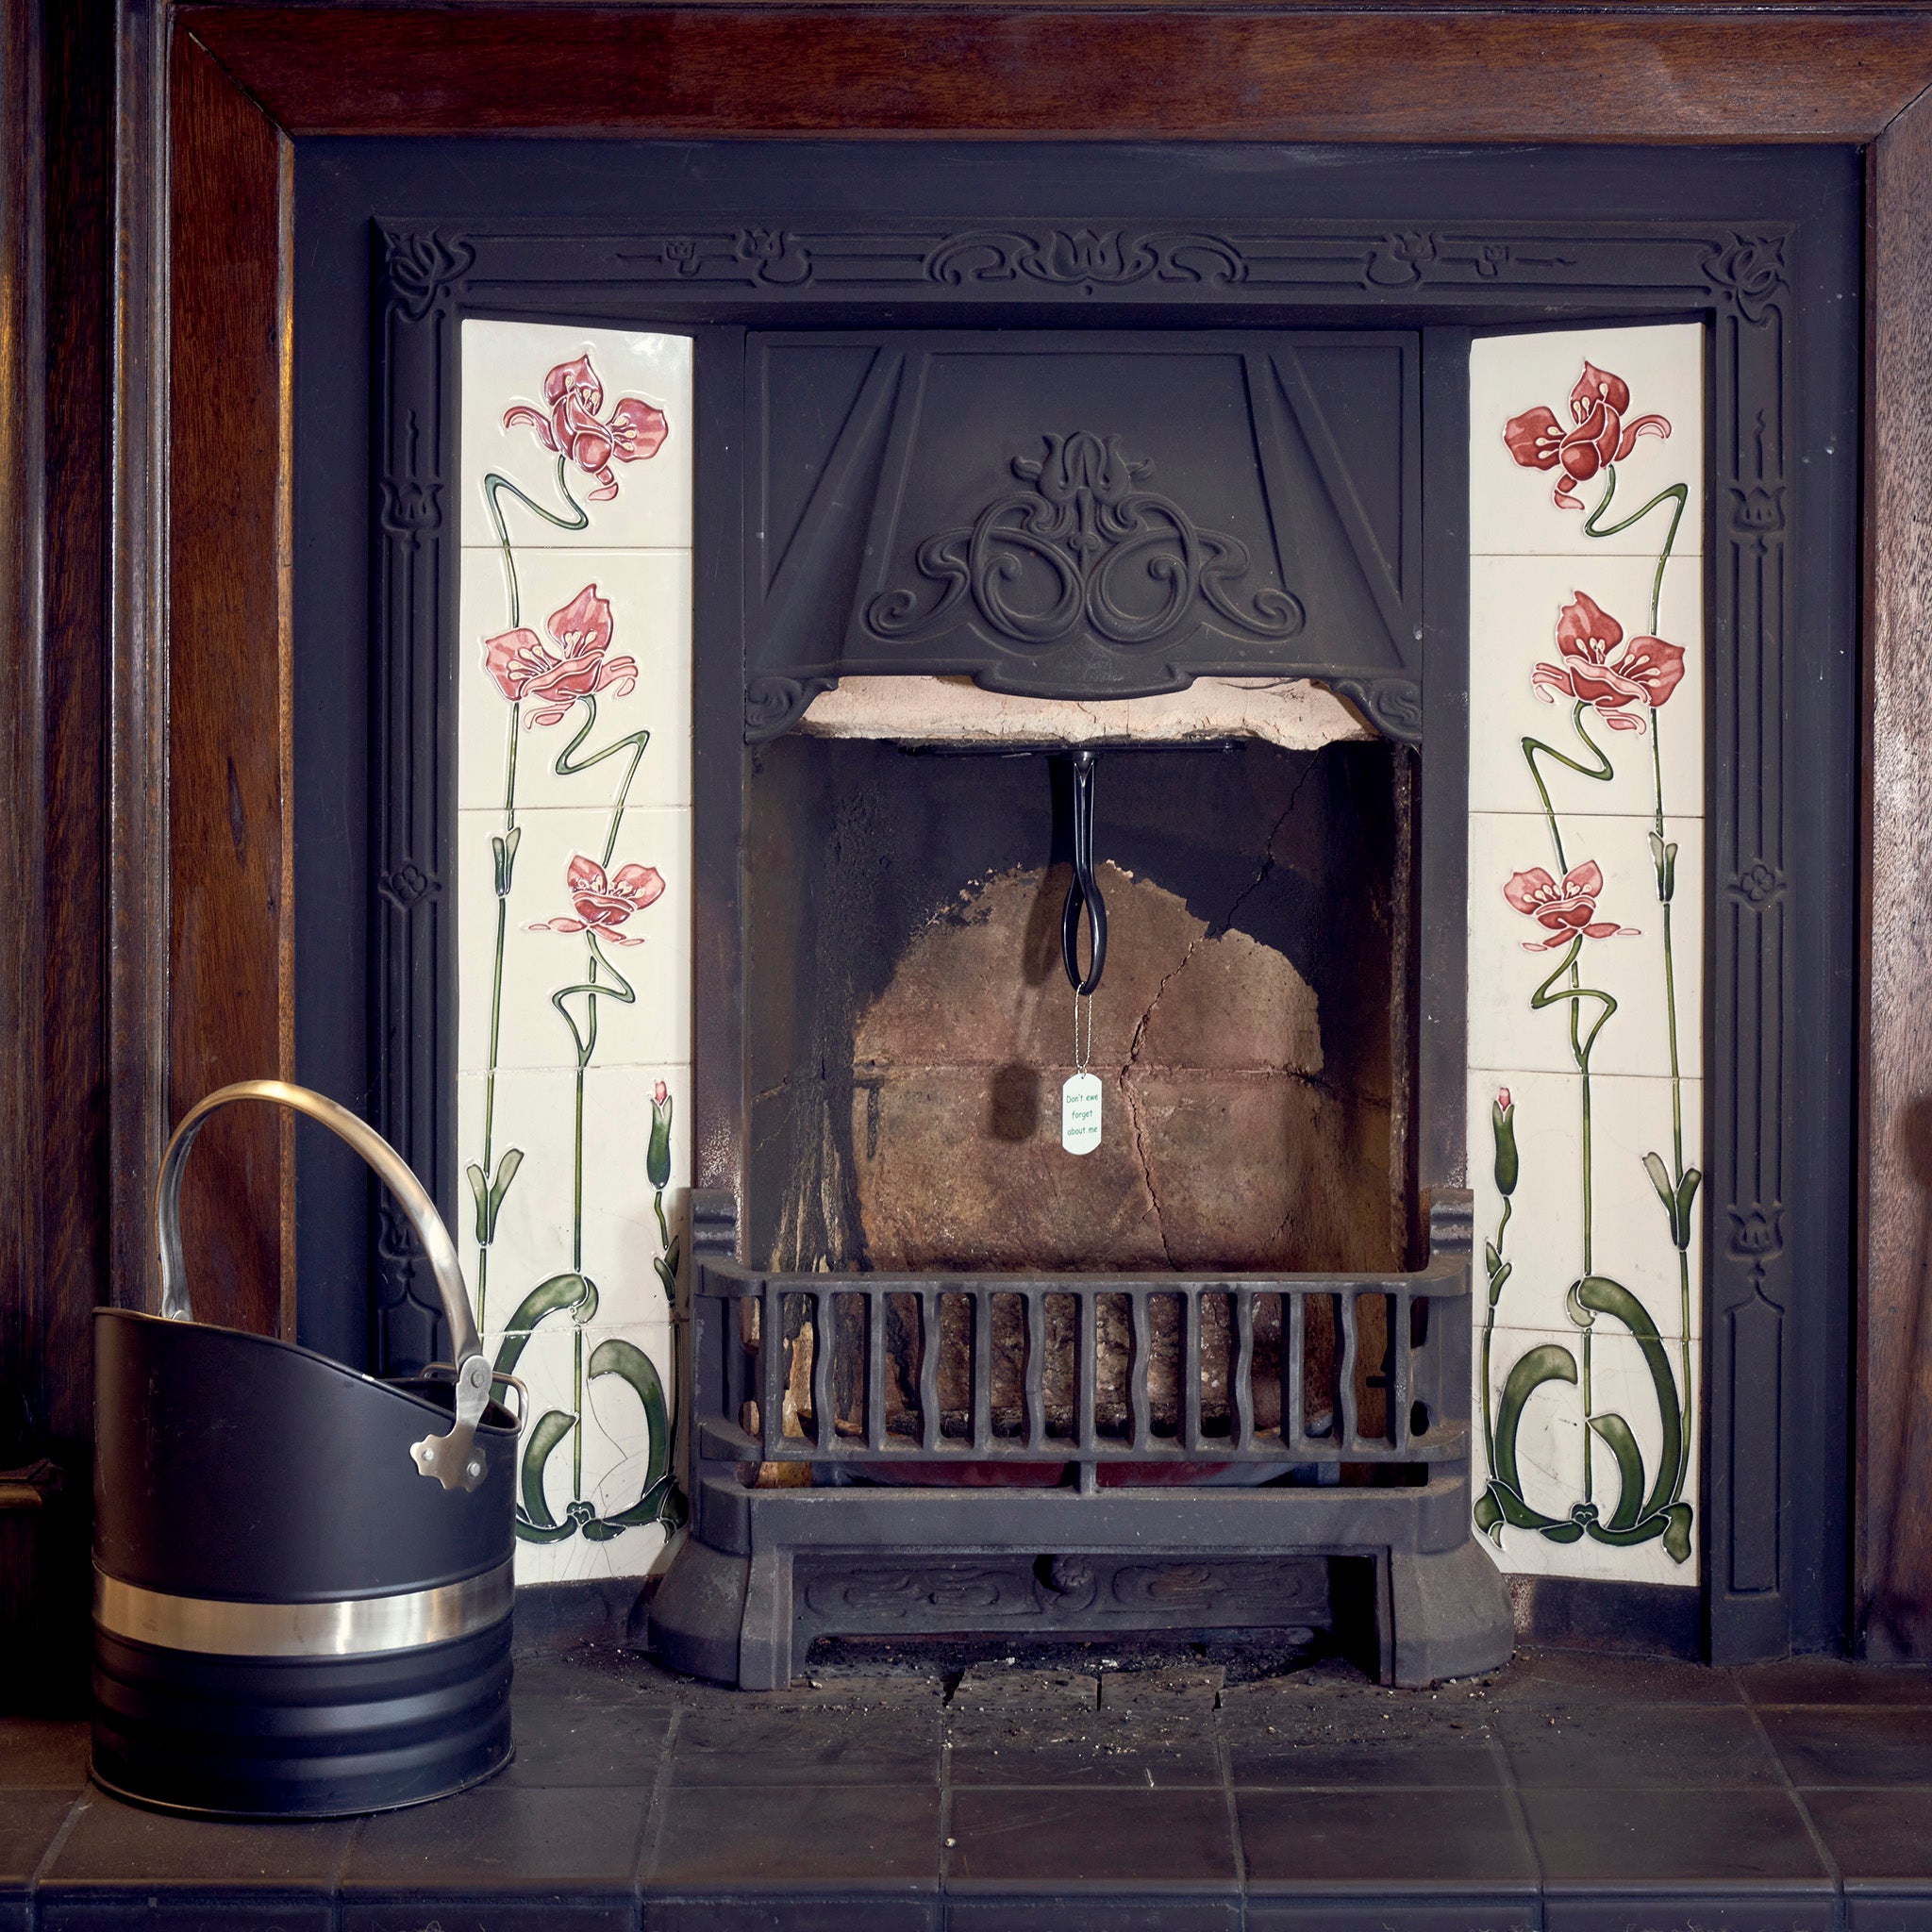 A Chimney Sheep in a fireplace with the handle and safety tag visible.